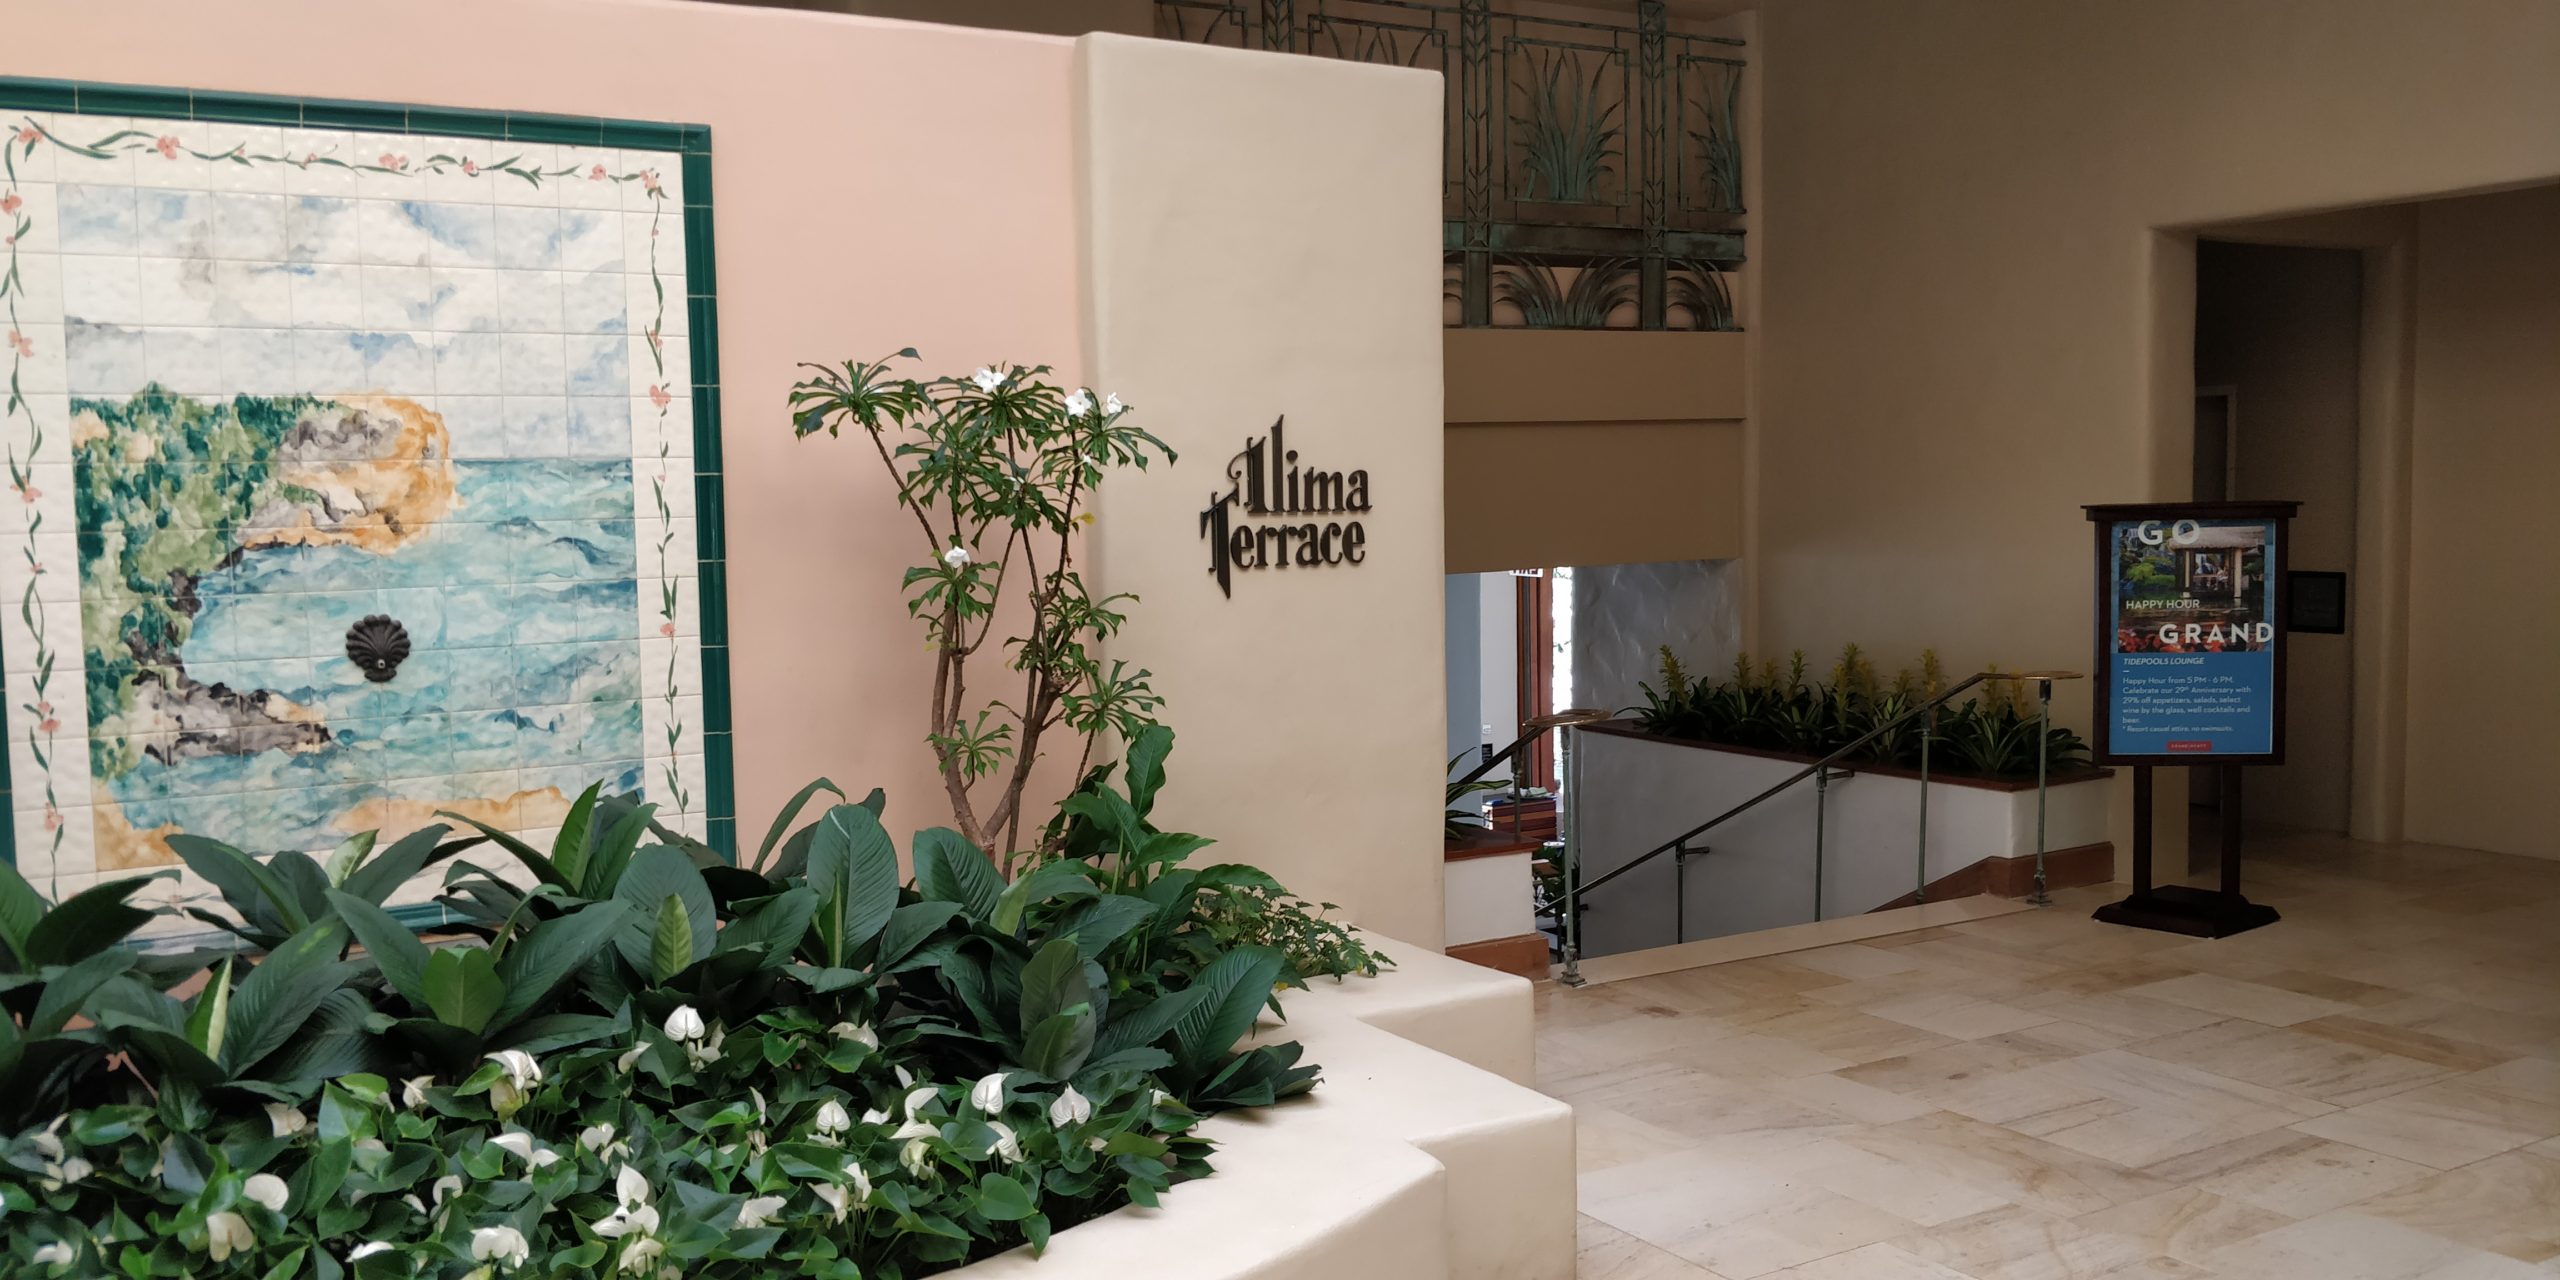 PICTURE OF THE ENTRANCE TO ILLIMA TERRACE RESTAURANT